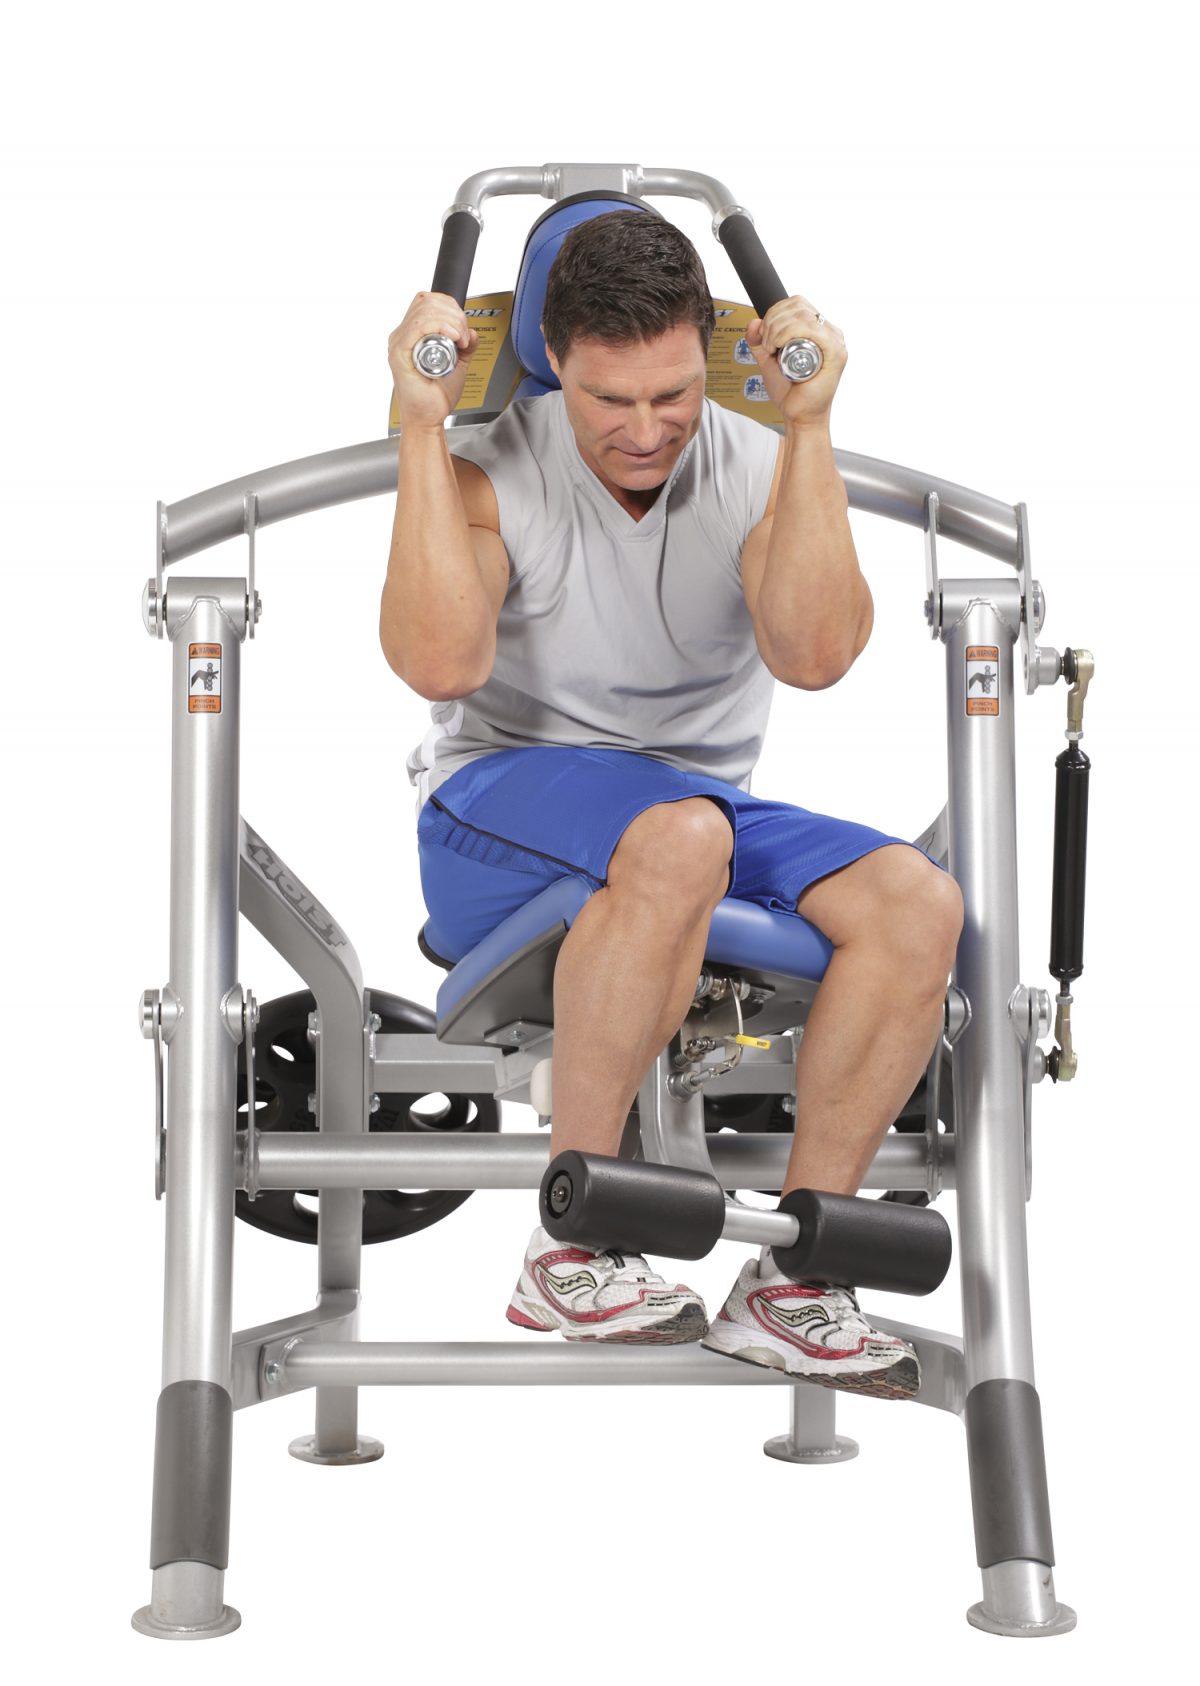 A man is sitting on a machine doing a bicep curl.